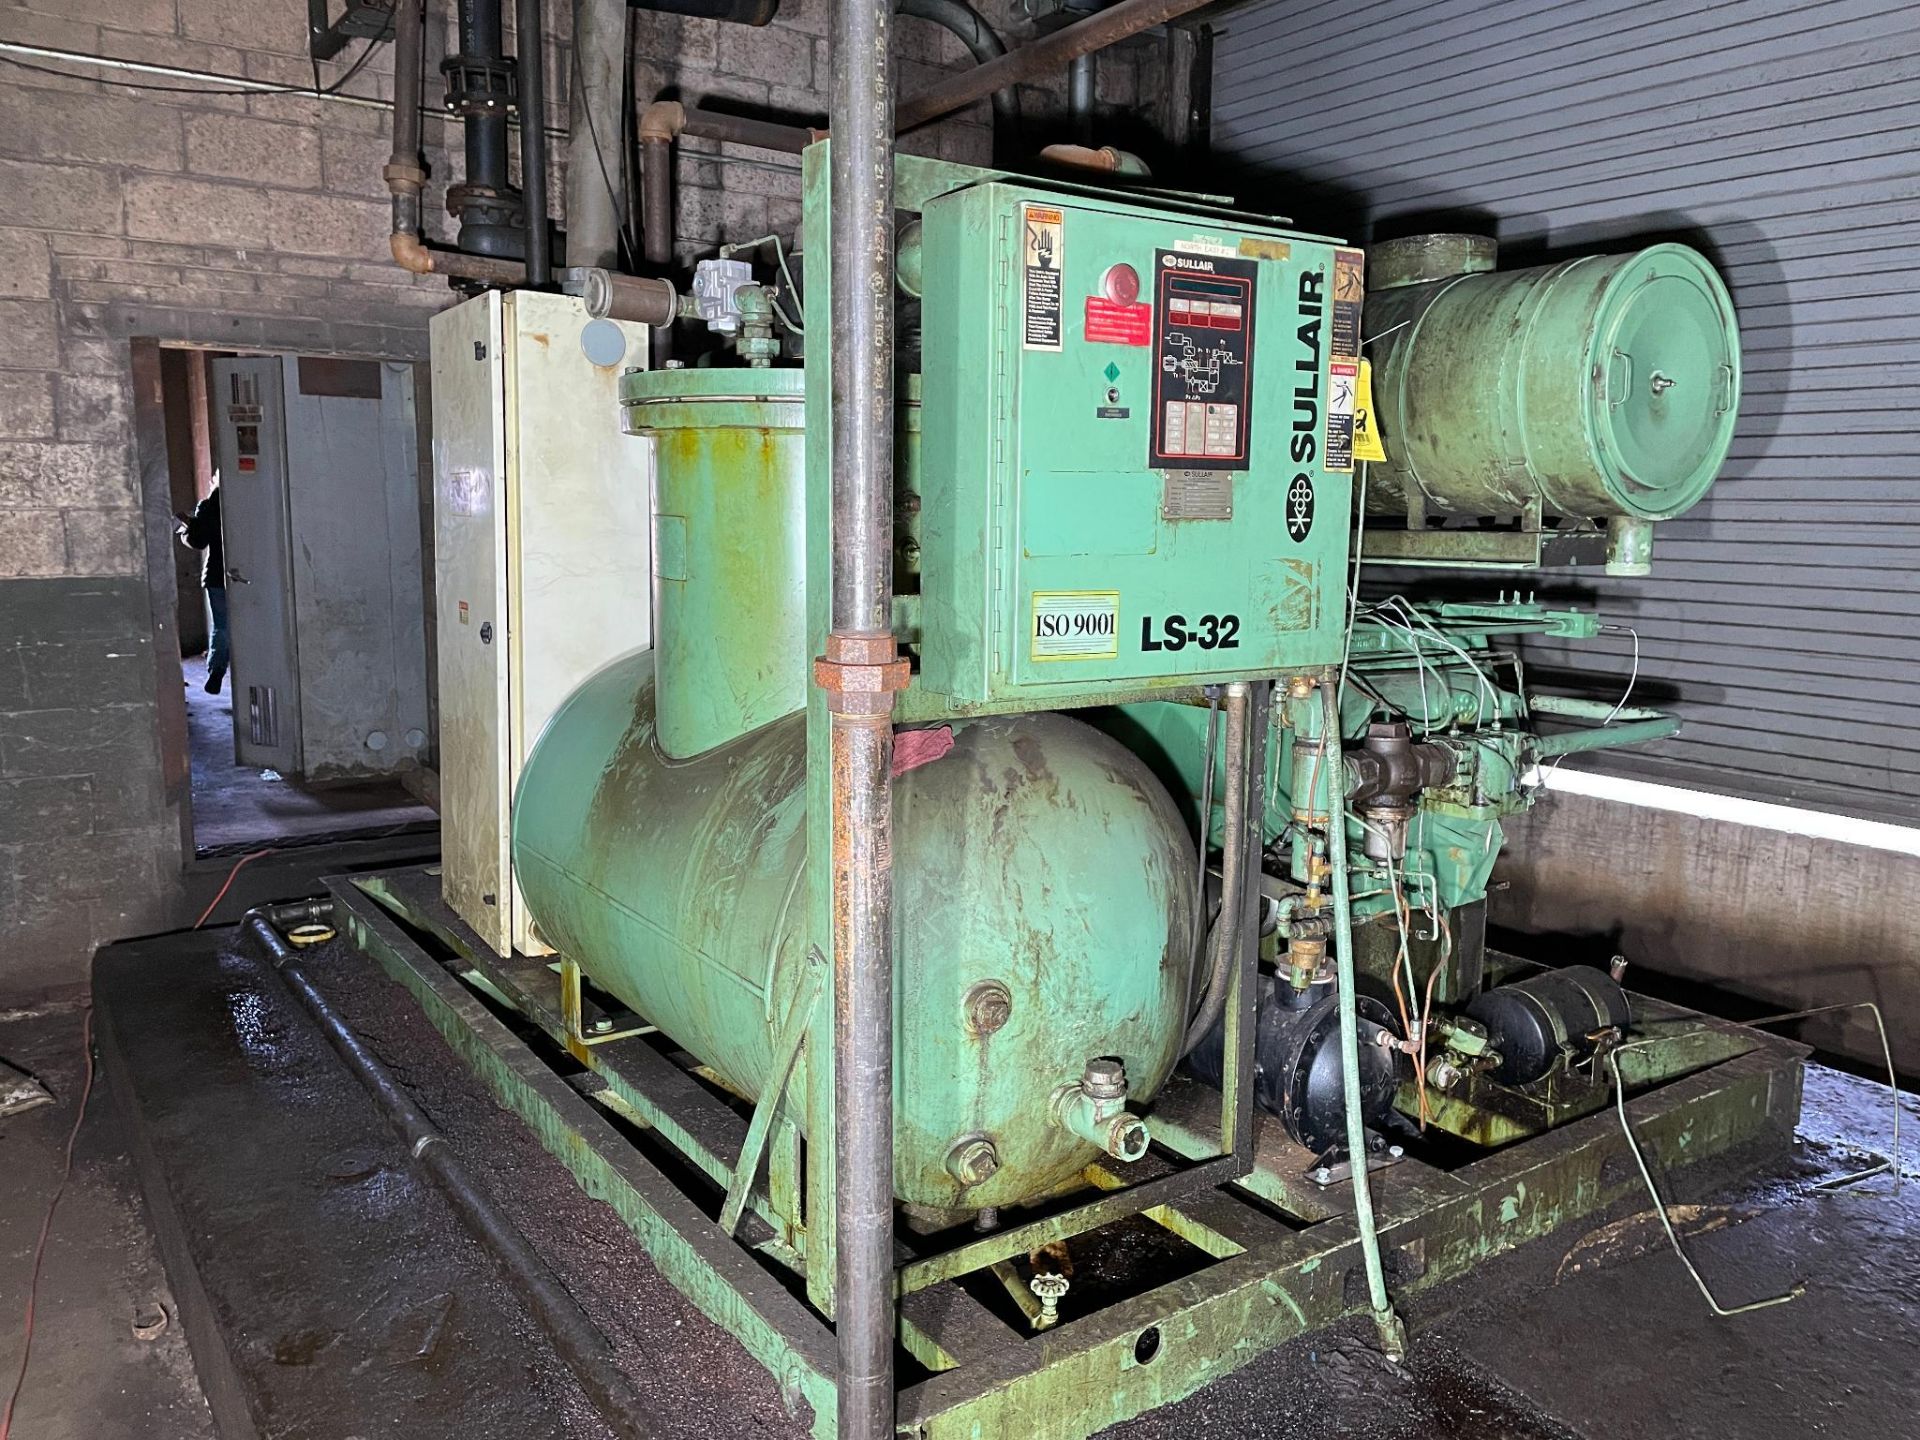 WATER COOLED ROTARY SCREW AIR COMPRESSOR, SULLAIR MDL. LS32-3001 WCWC, approx. 300 HP, S/N 003-